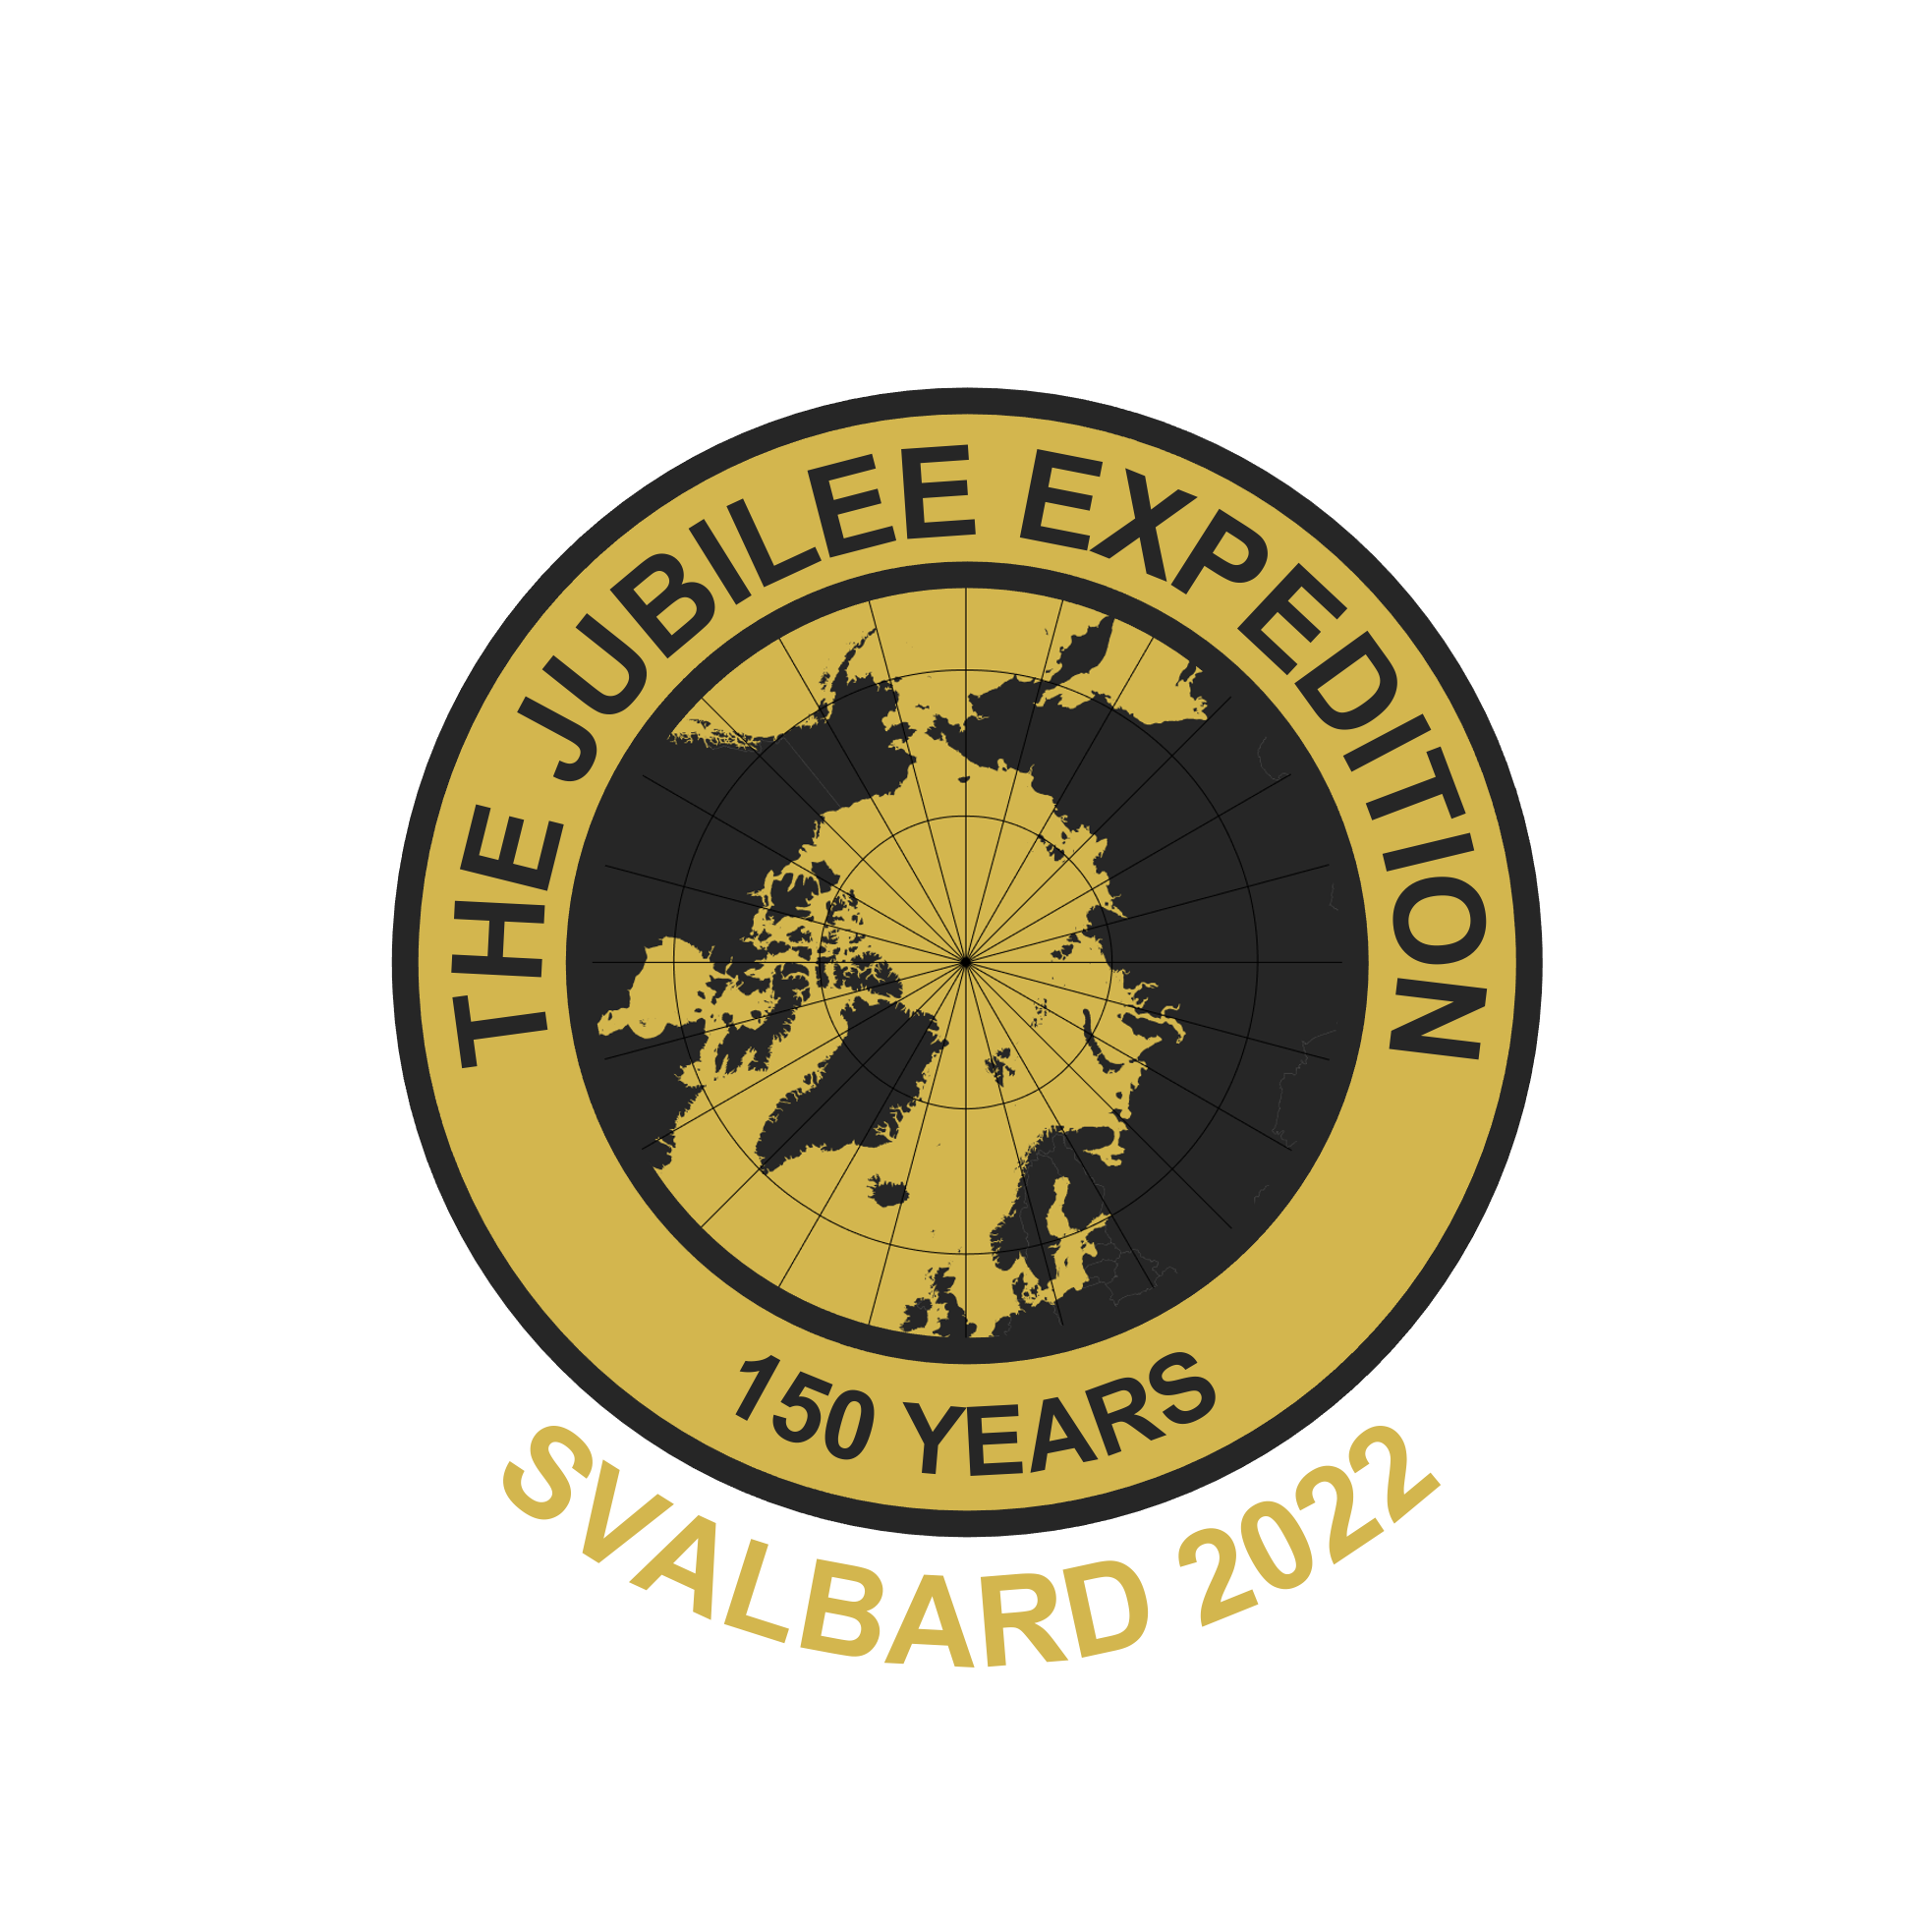 The Jubilee Expedition Svalbard 2022